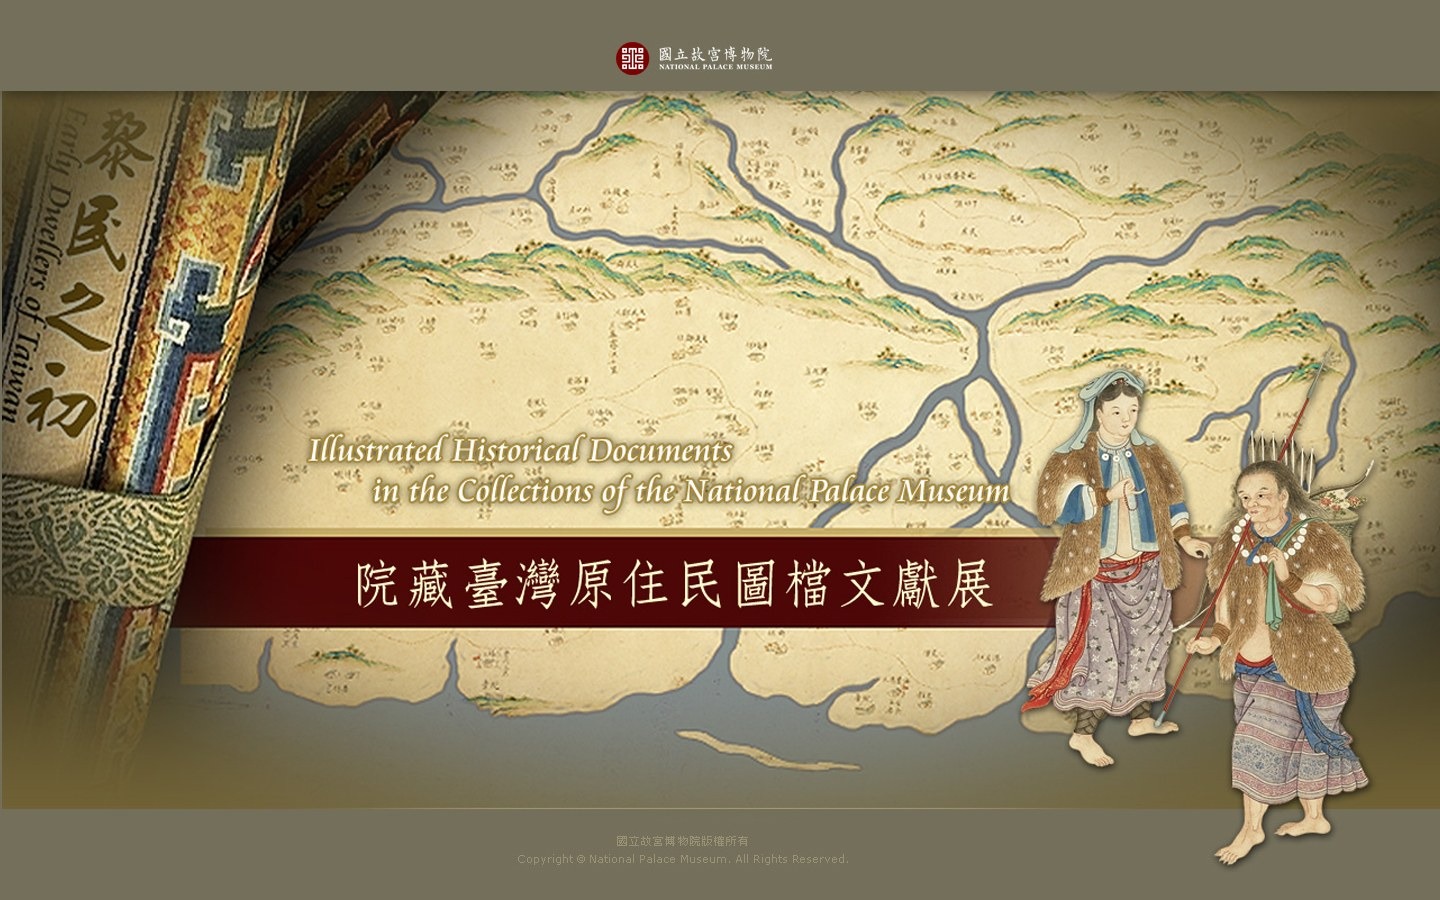 National Palace Museum exhibition wallpaper (1) #10 - 1440x900